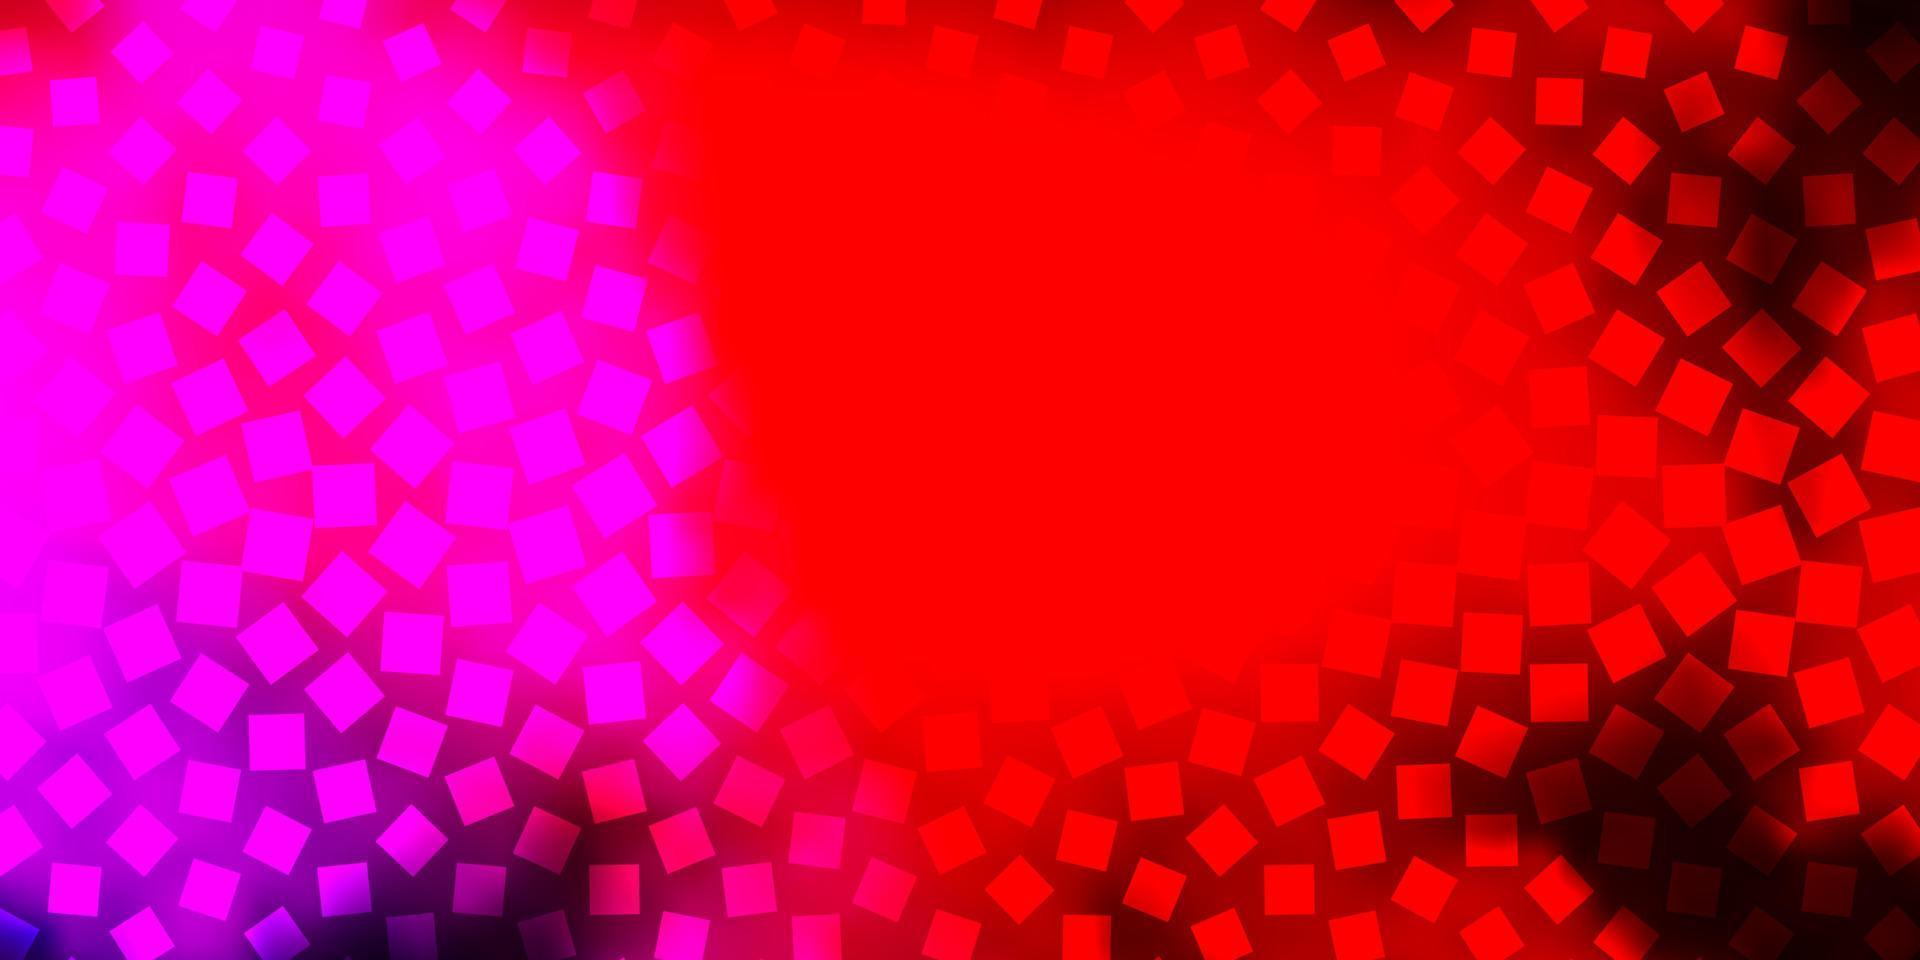 Dark Pink, Yellow vector backdrop with rectangles.